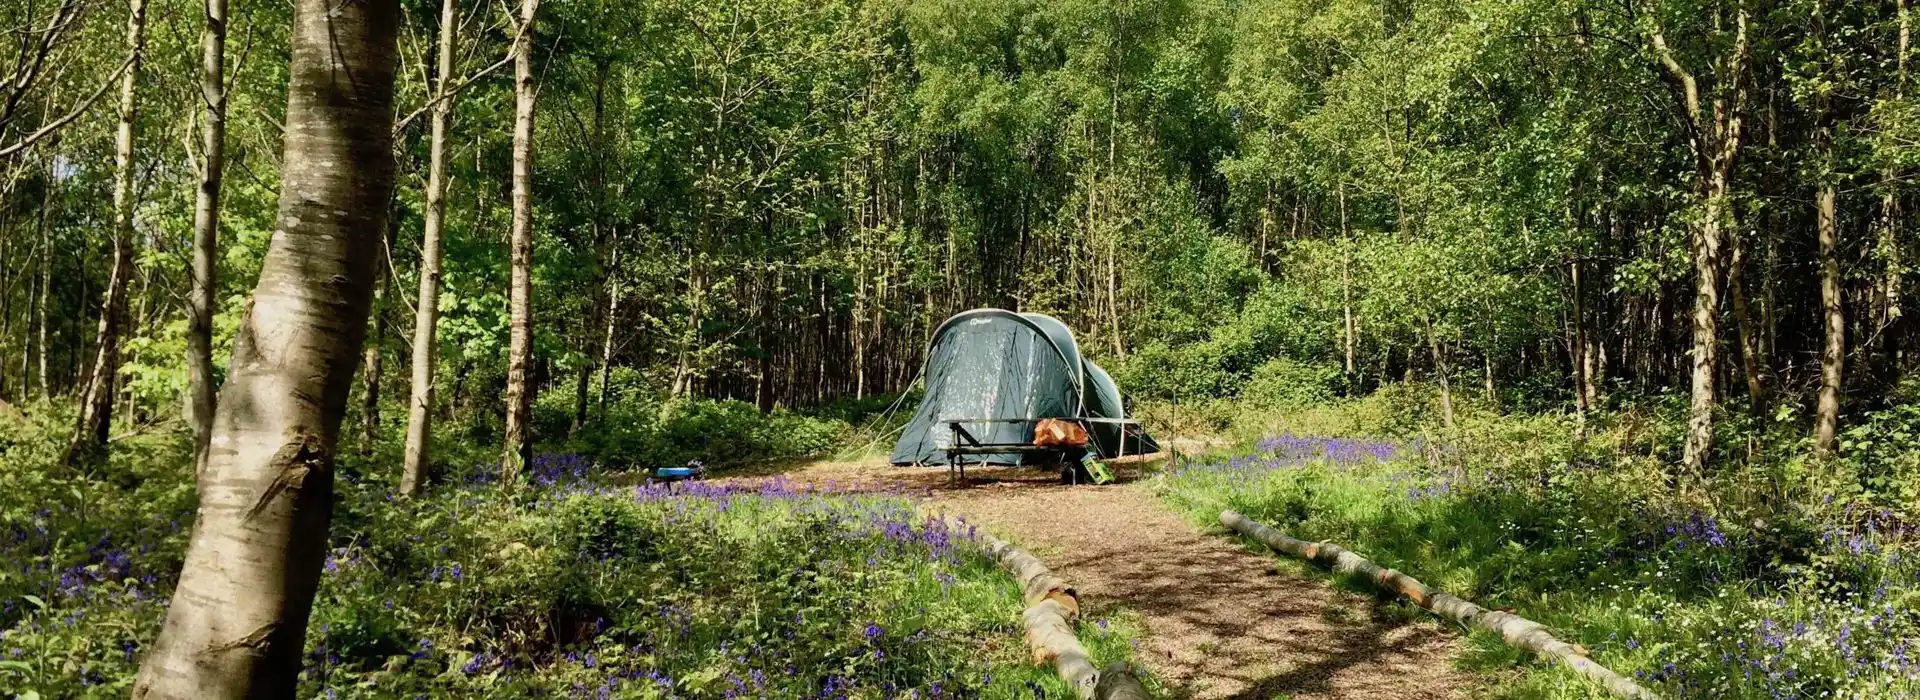 Woodland camping in the UK